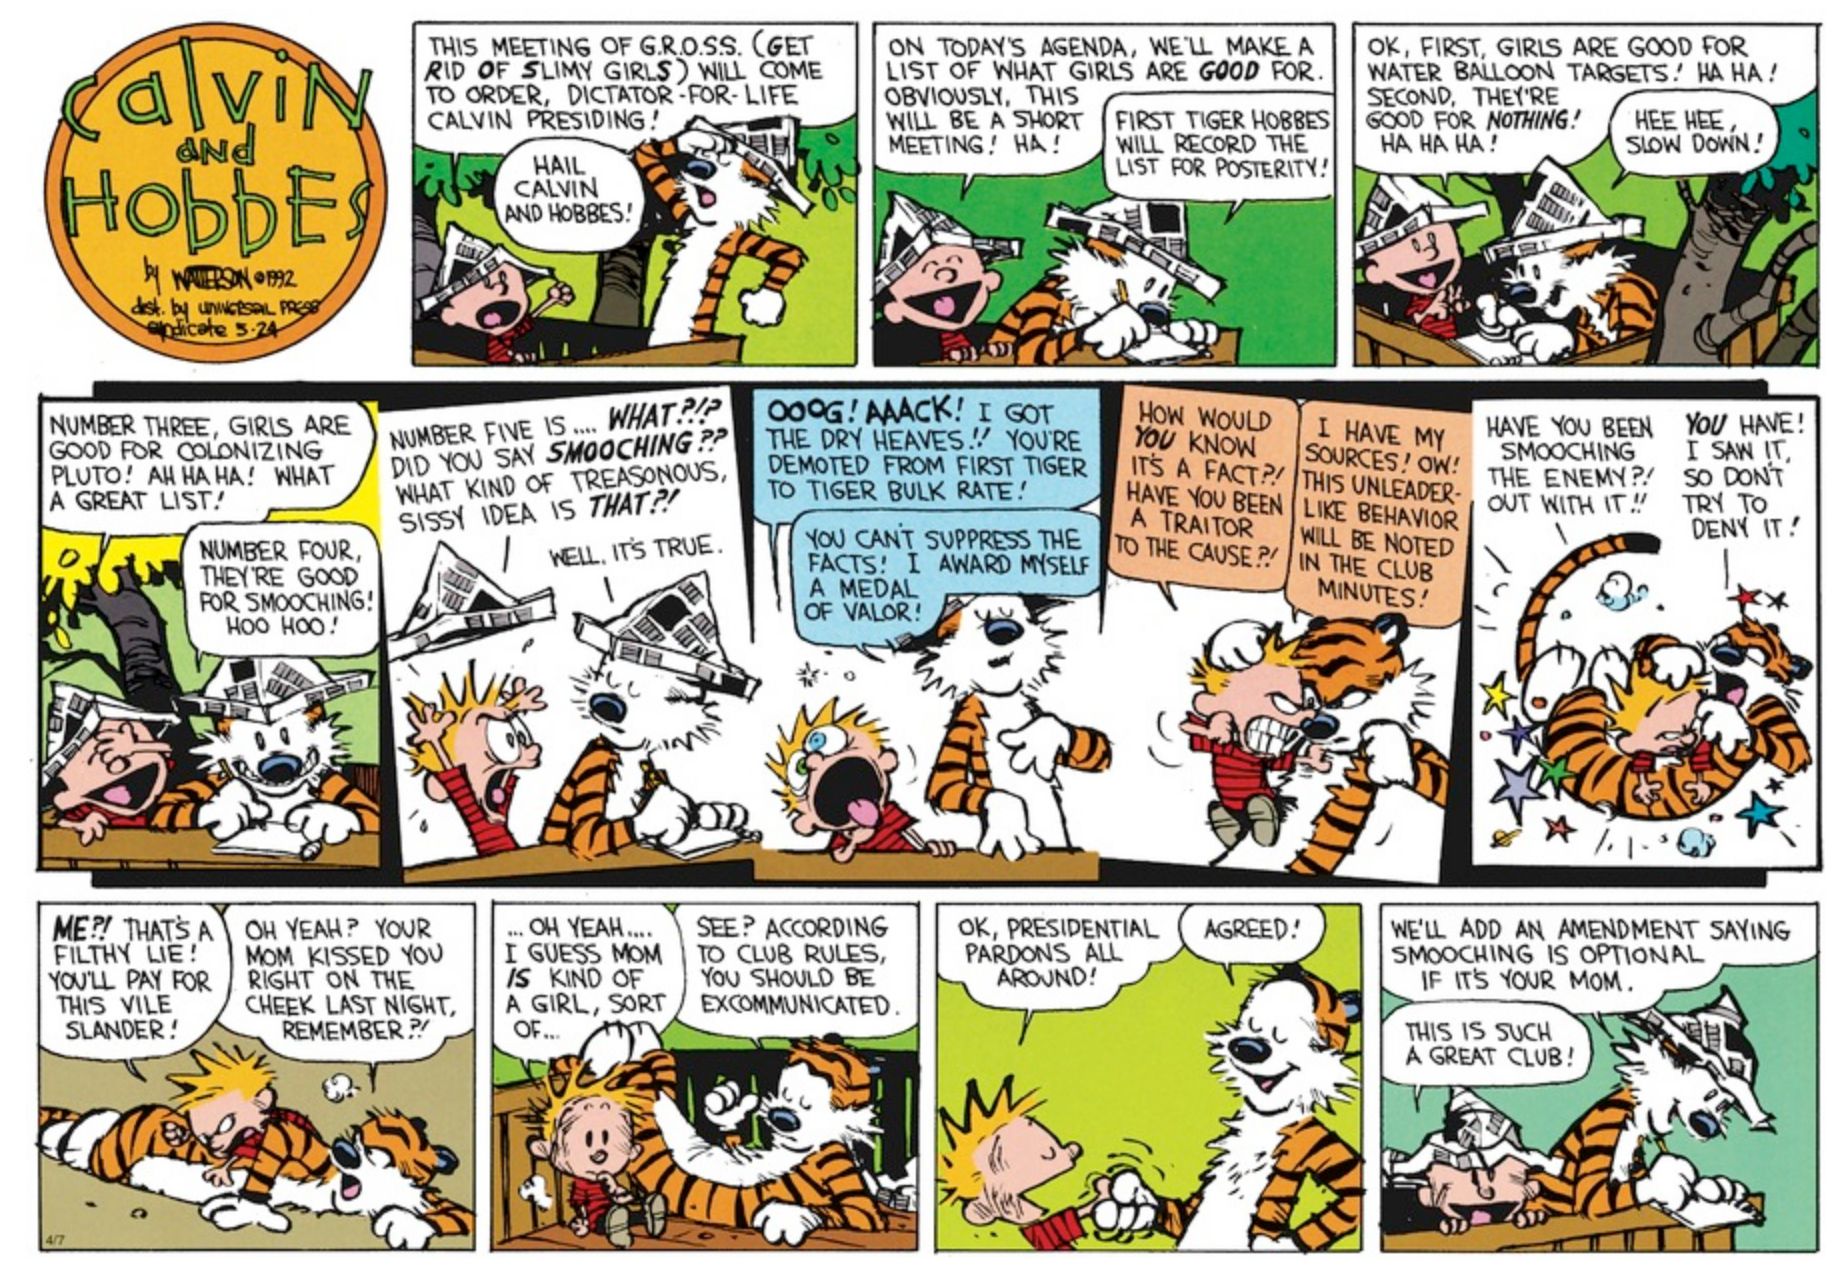 GROSS meeting in Calvin and Hobbes